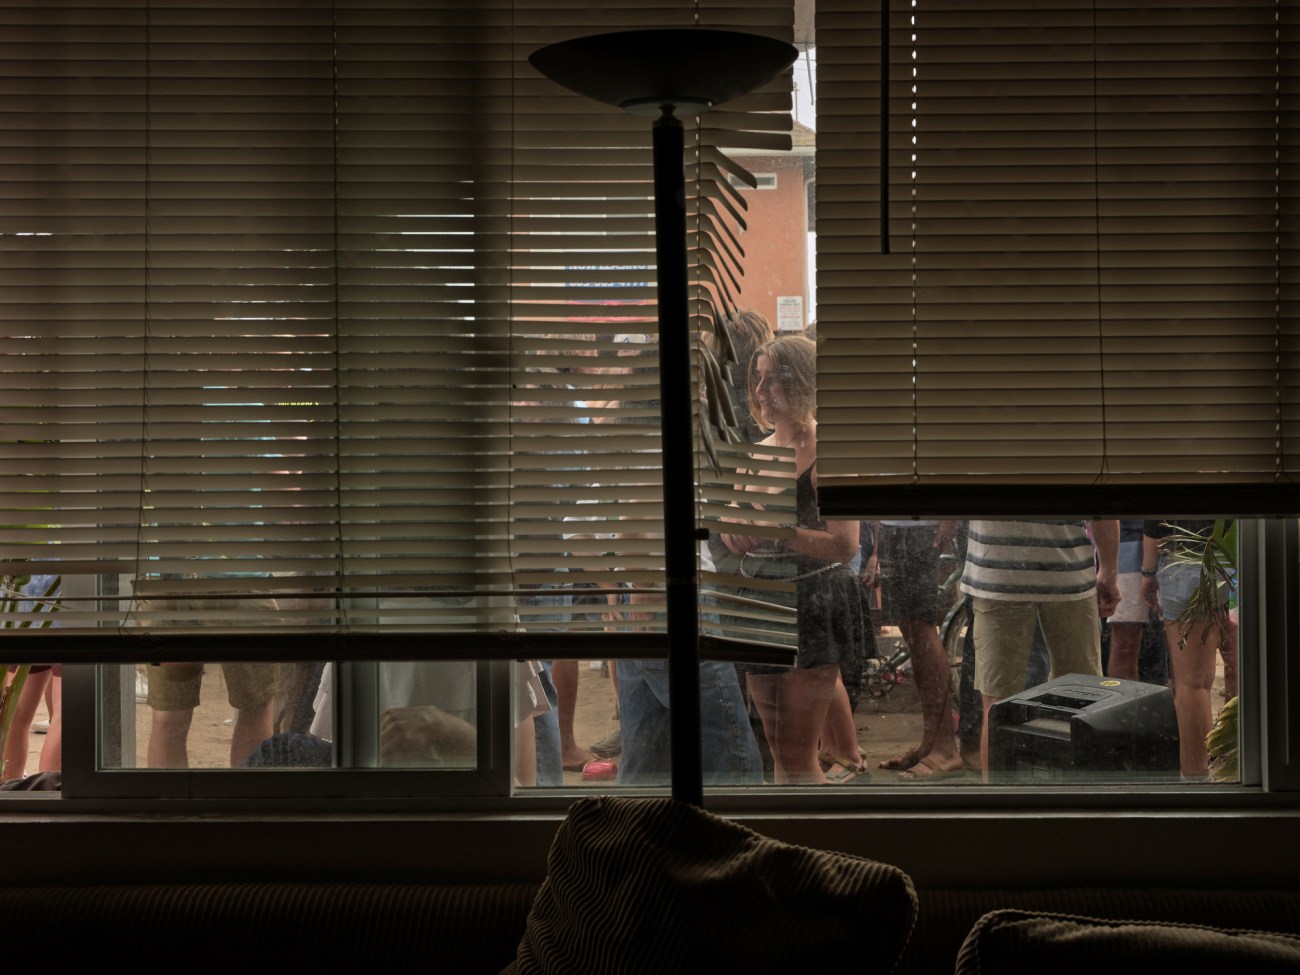 View of a party outside from inside an apartment with blinds partially drawn.